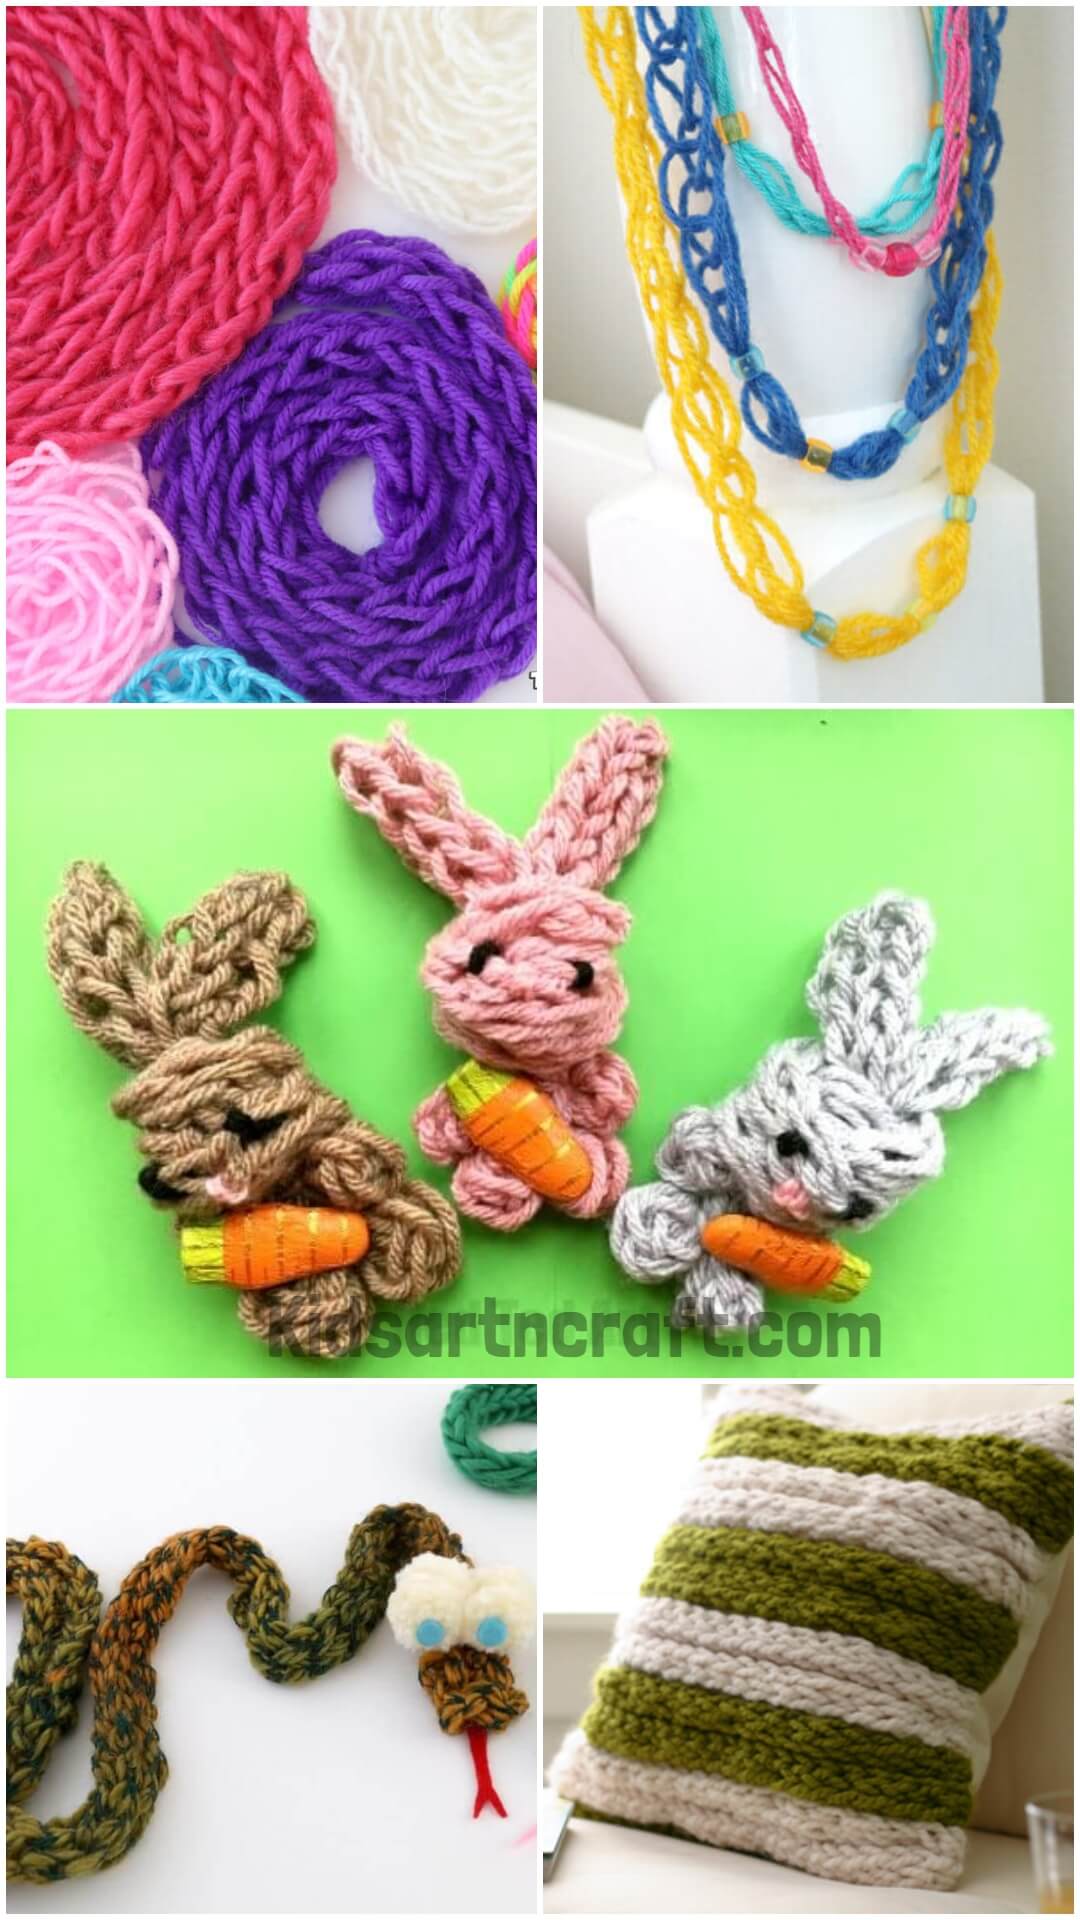 Things to do with yarn and fingers